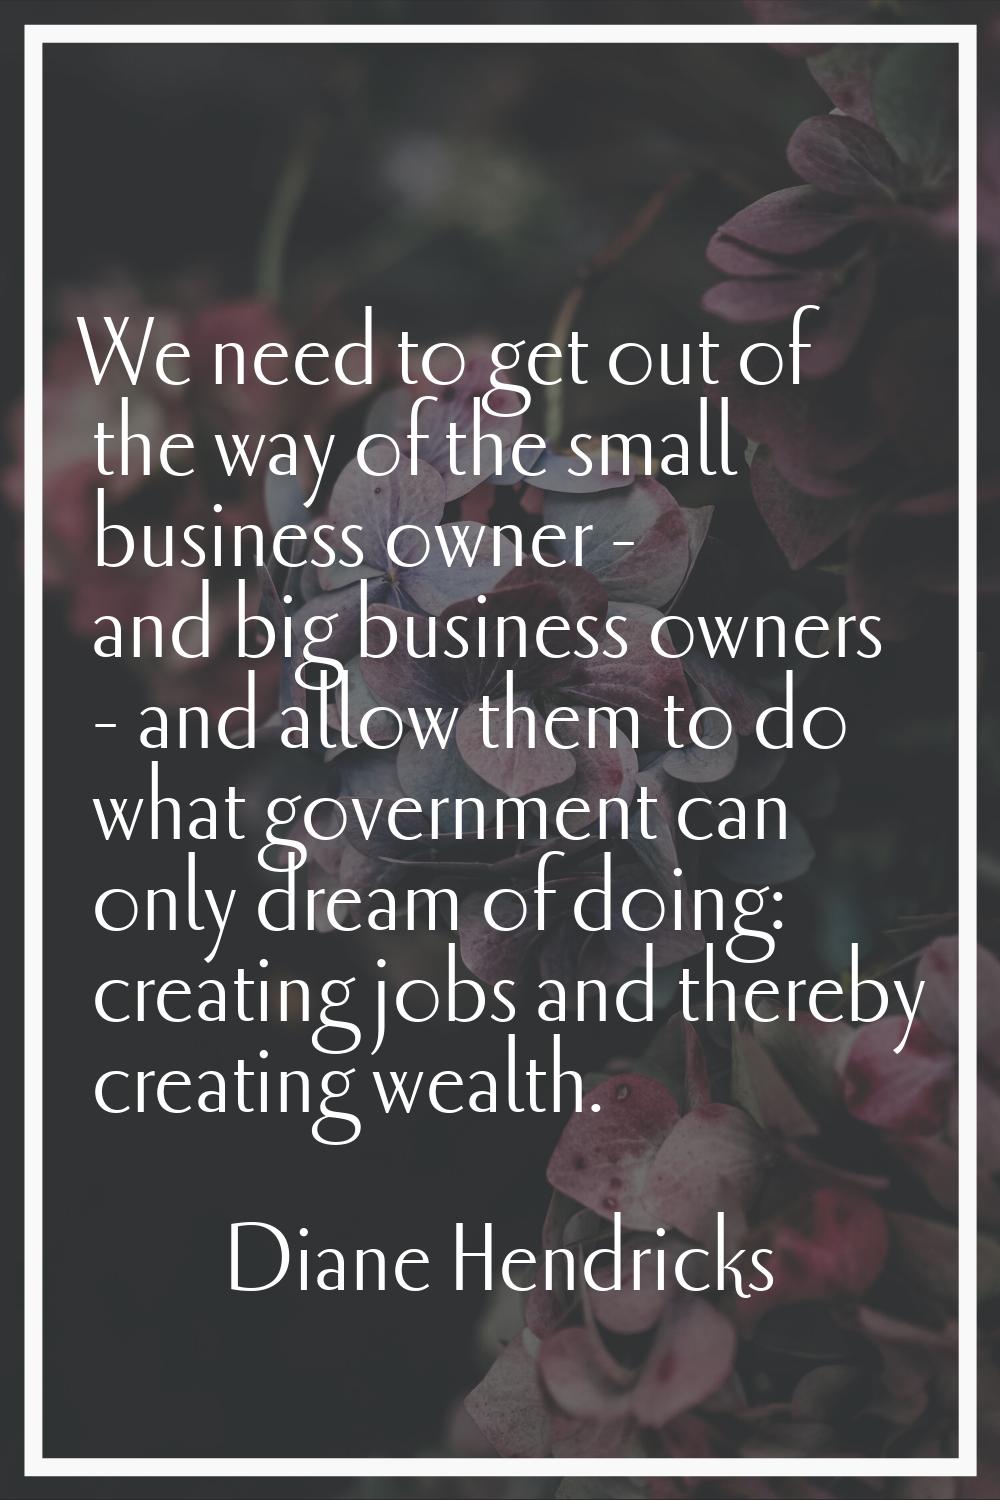 We need to get out of the way of the small business owner - and big business owners - and allow the